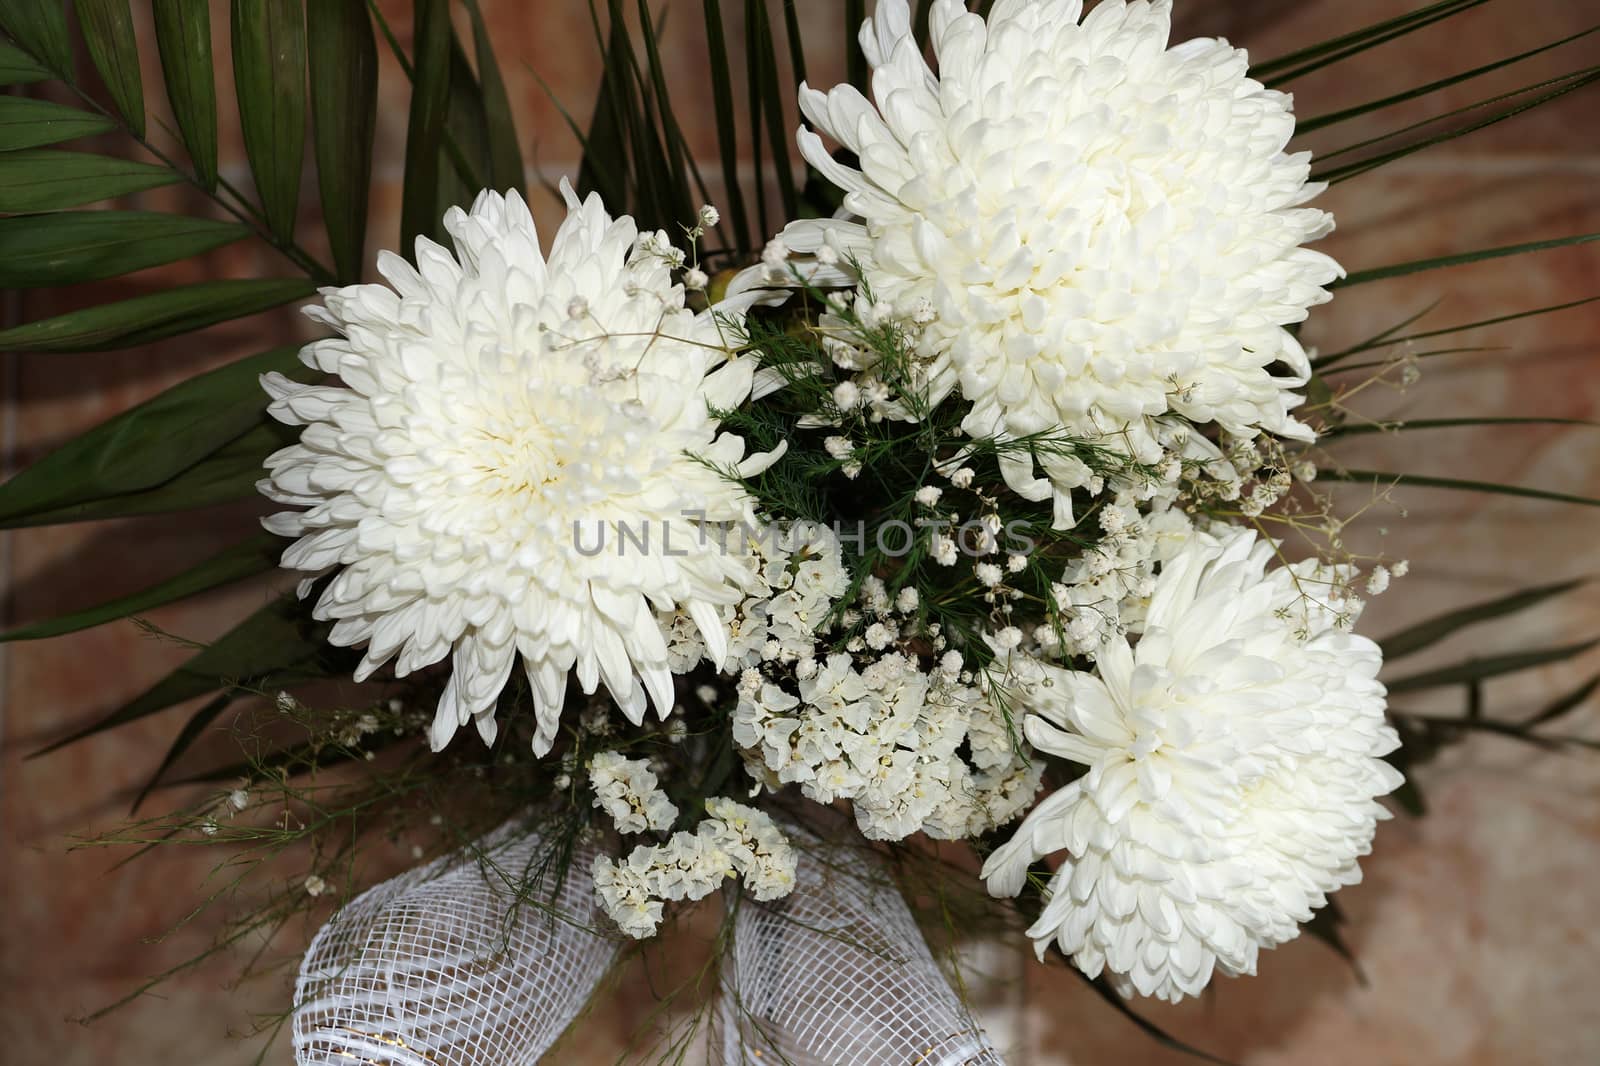 bouquet of white chrysanthemums on a light background